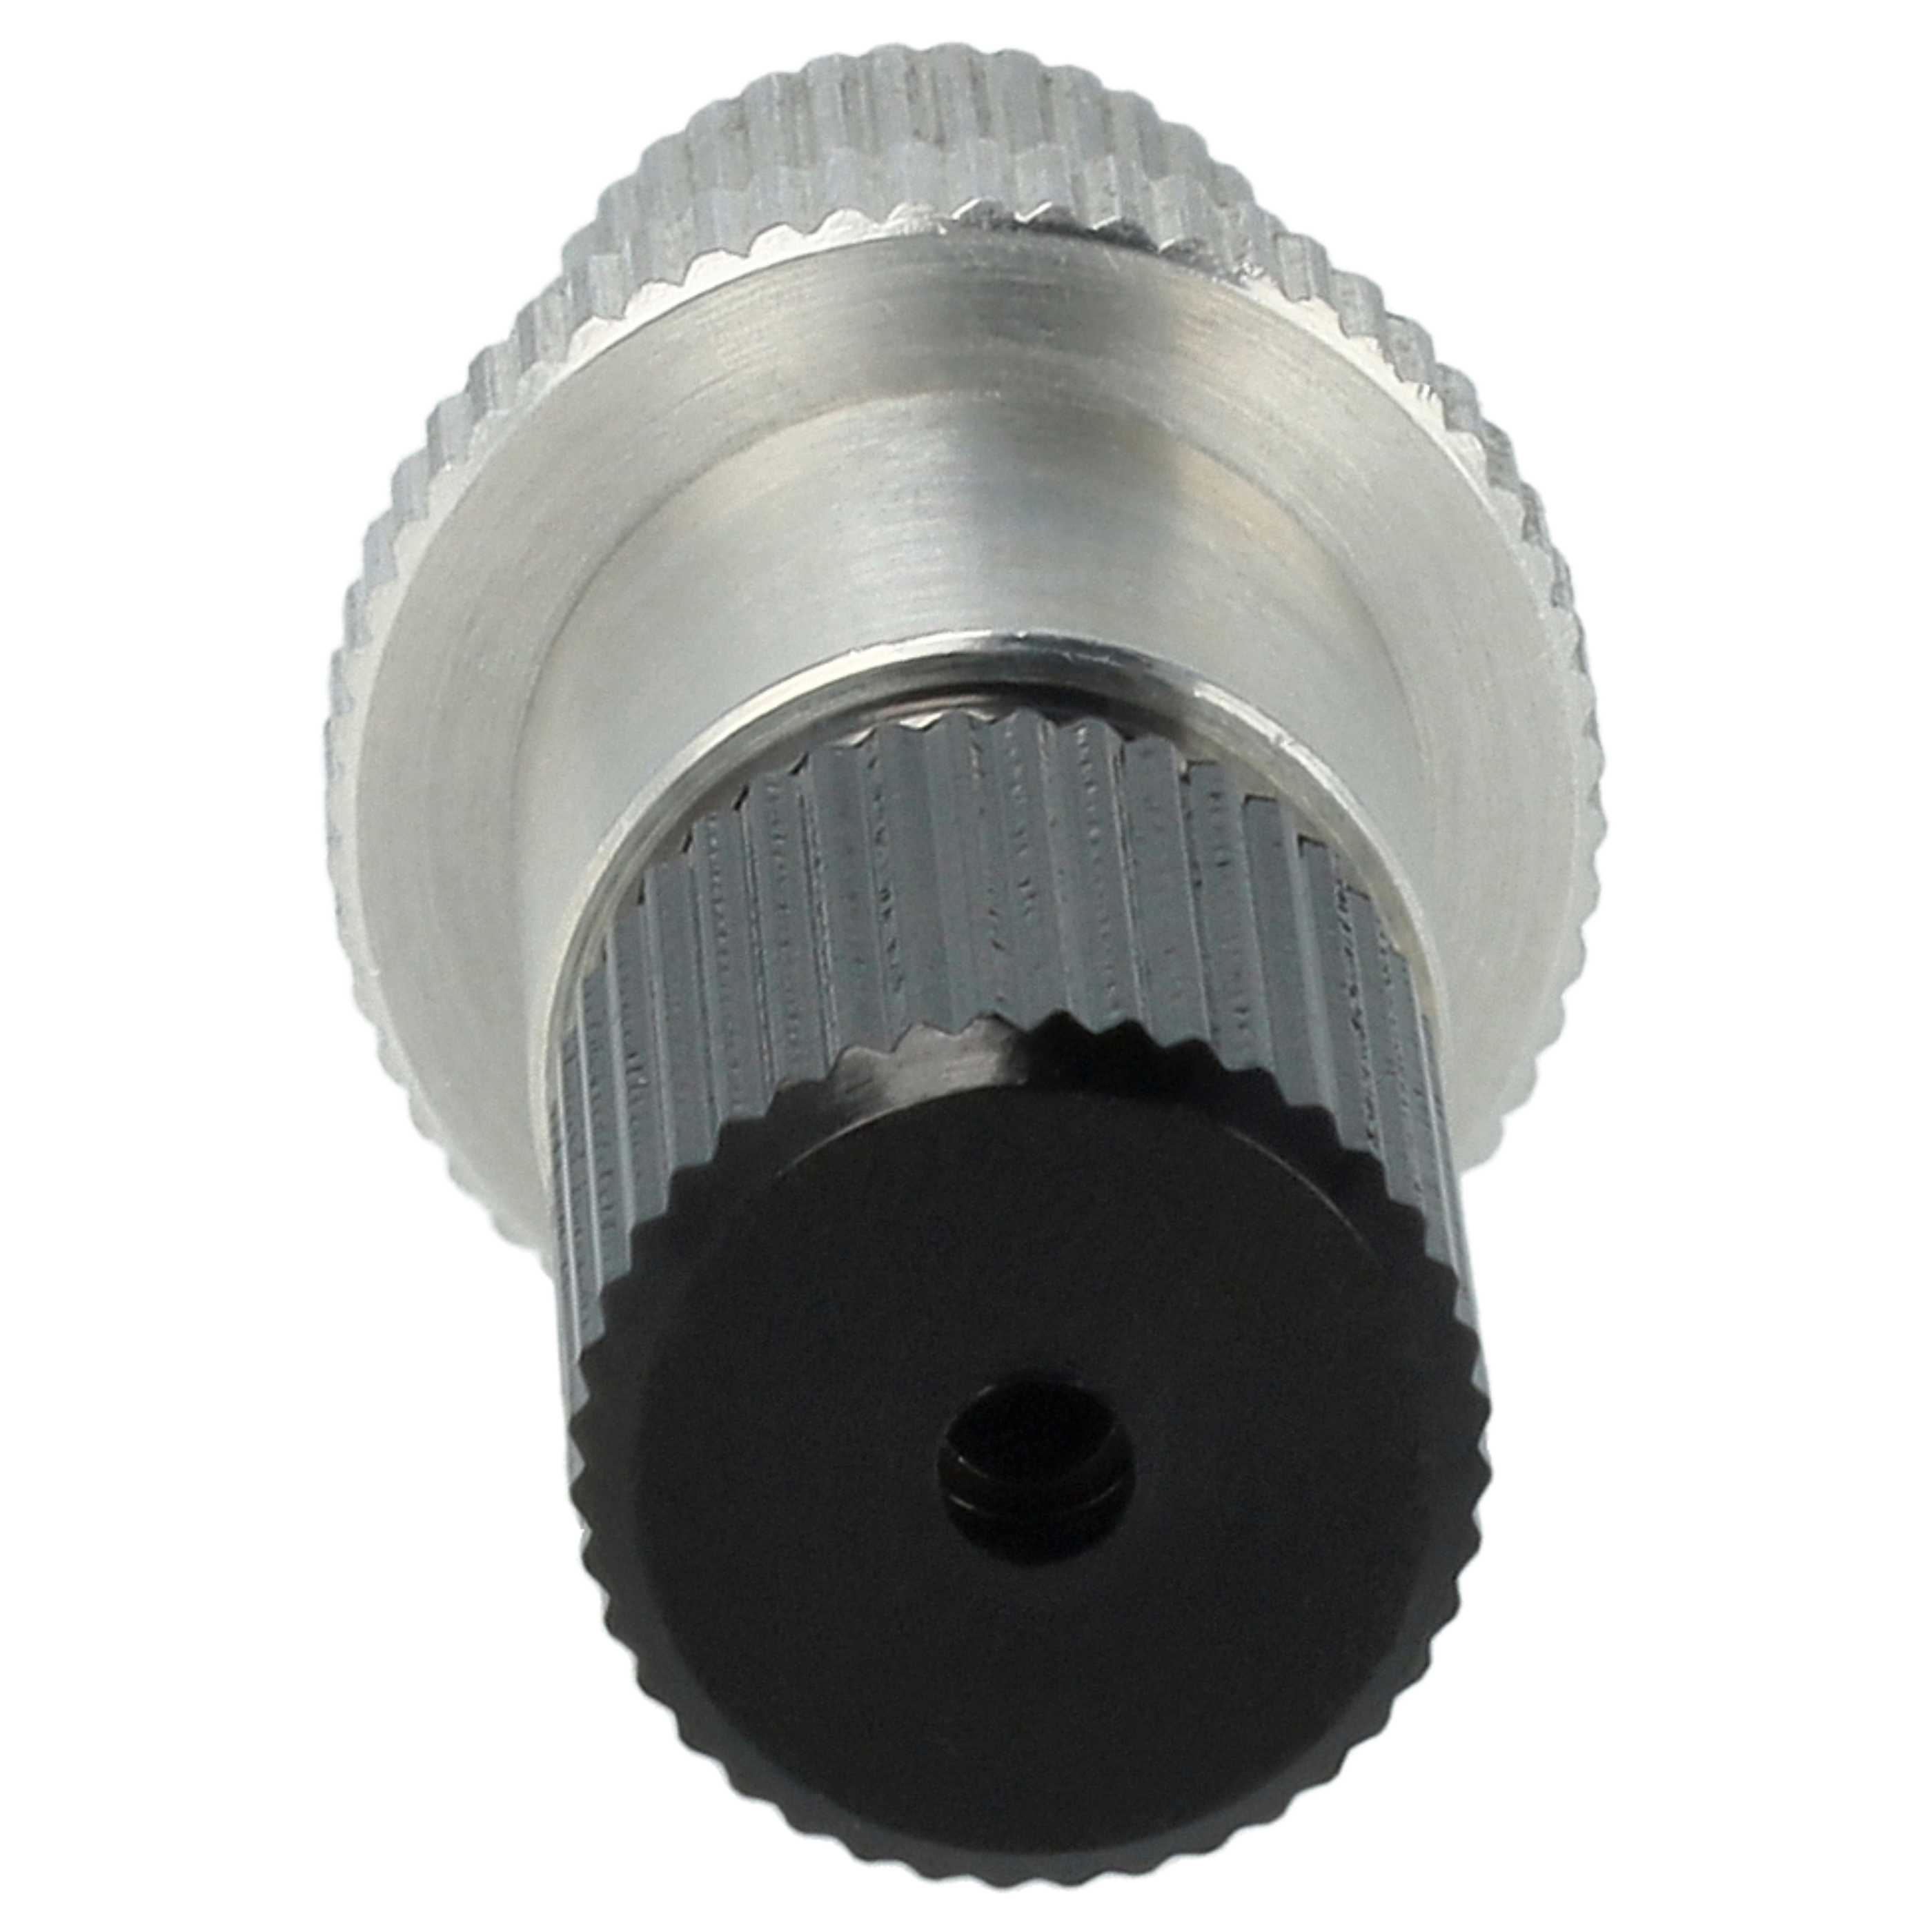 Blade Holder replaces Roland XD-CH2, XD-CH3 for Roland Plotter etc. - 11/16 mm Diameter